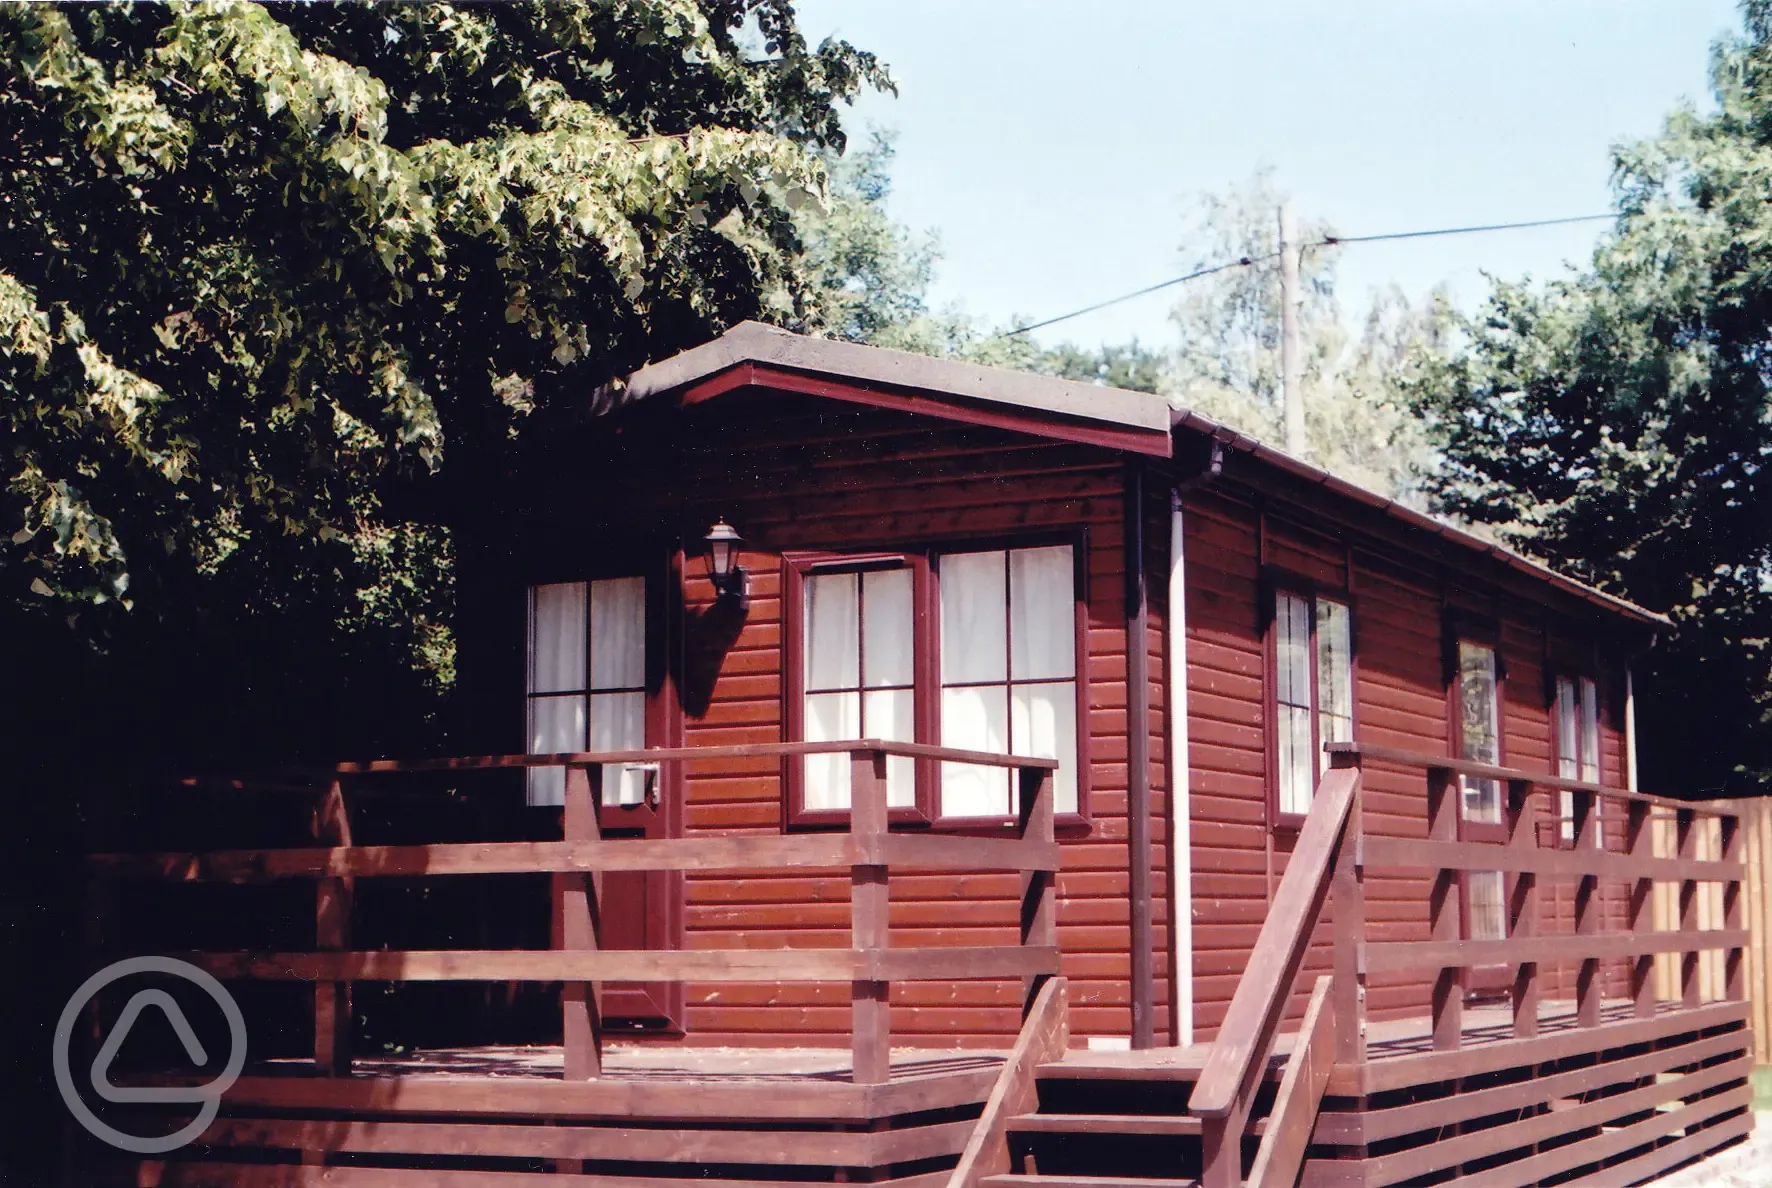 Self-catering lodges for hire sleeping up to 4 adults